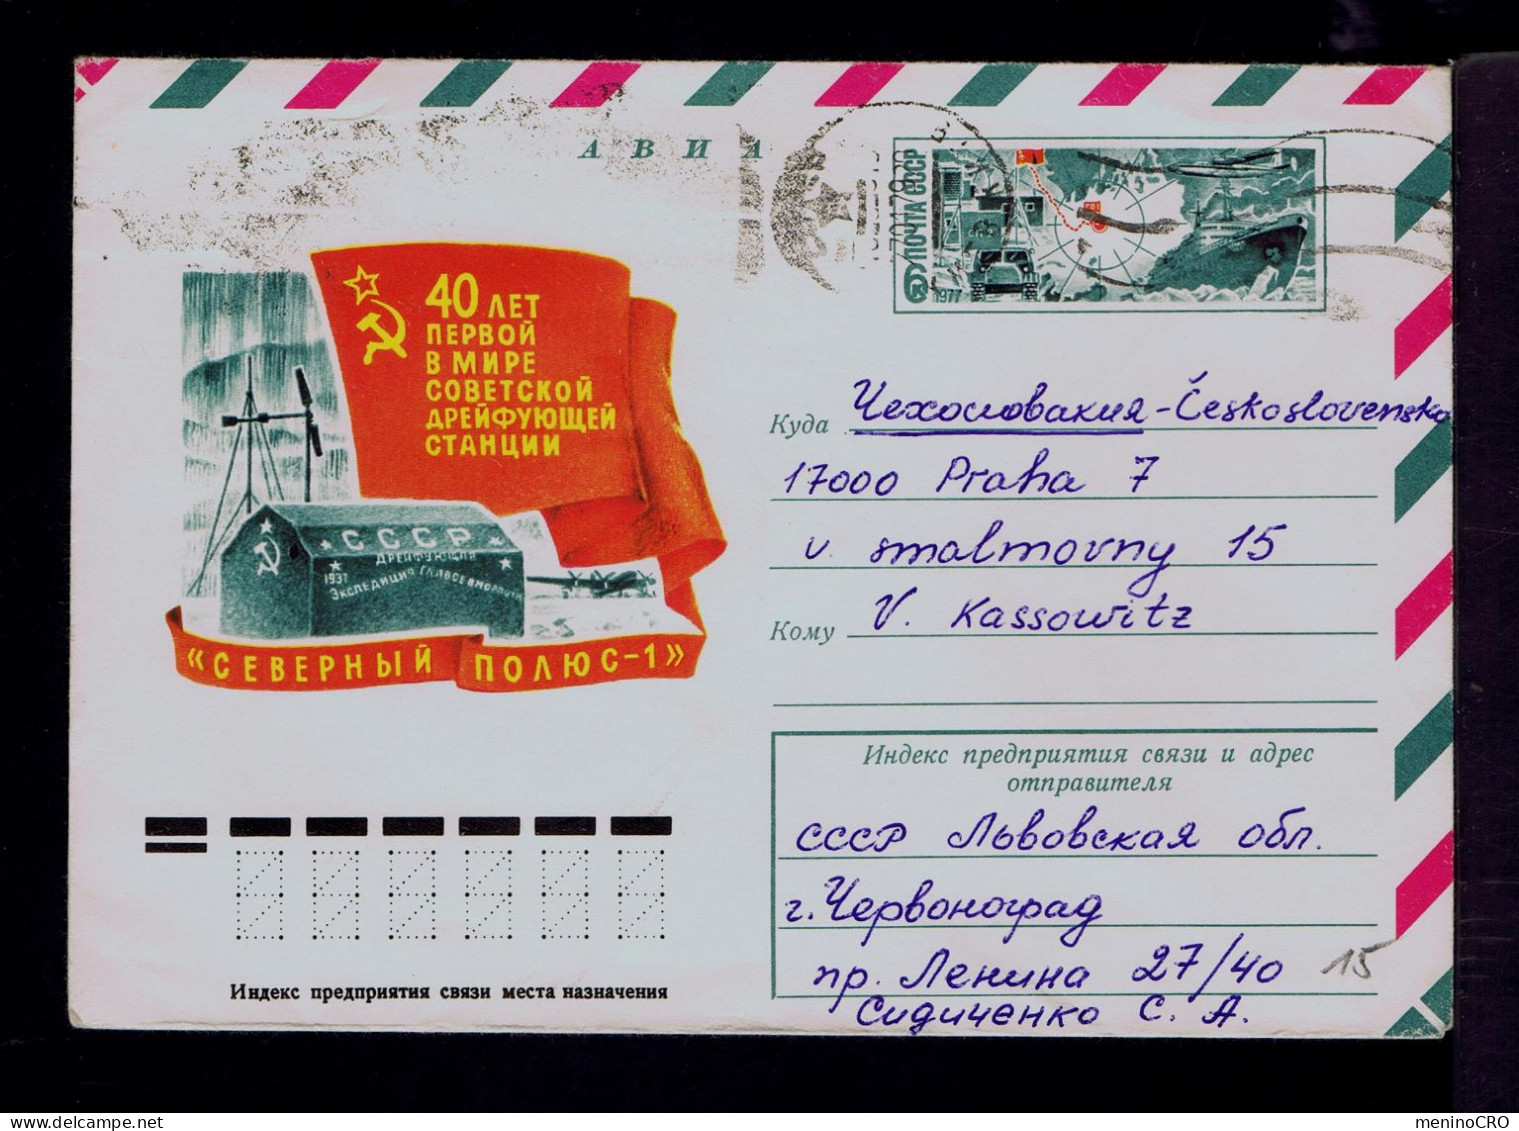 Gc7985 RUSSIE North Polar Scientific Stations 40 Ann. Cover Postal Stationery Mailed - Wetenschappelijke Stations & Arctic Drifting Stations